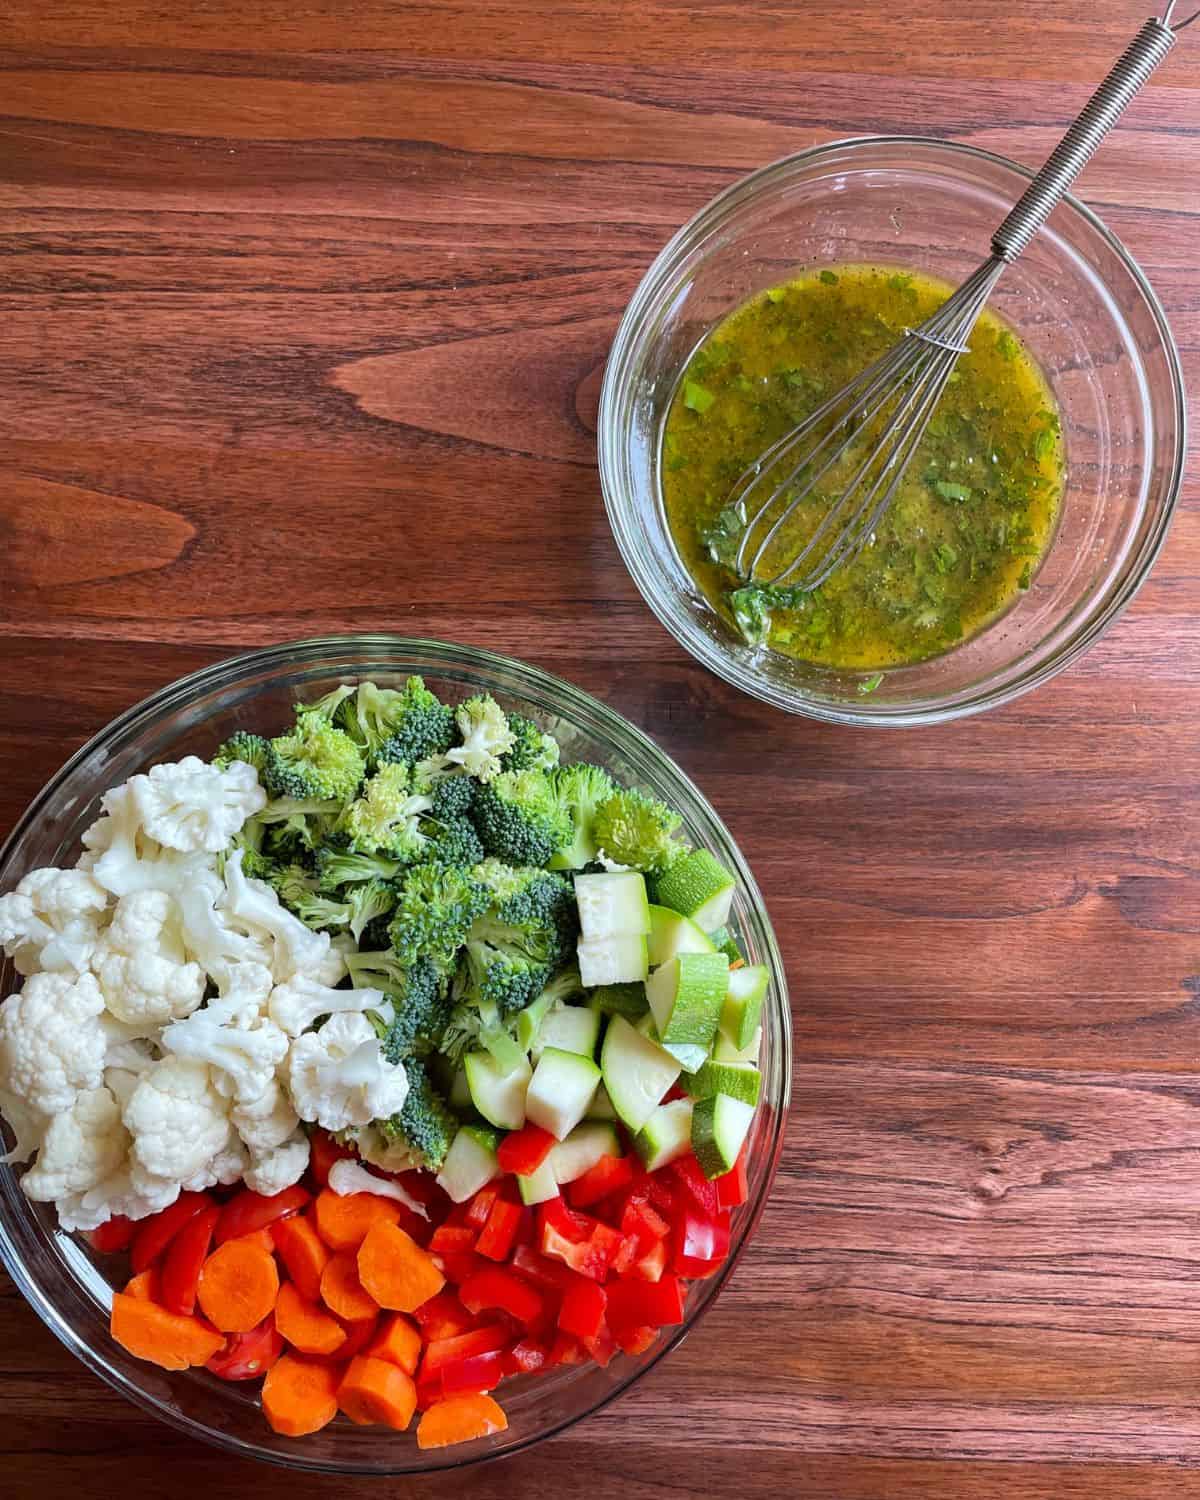 A large glass bowl of vegetables with the small glass bowl of salad dressing next to it.